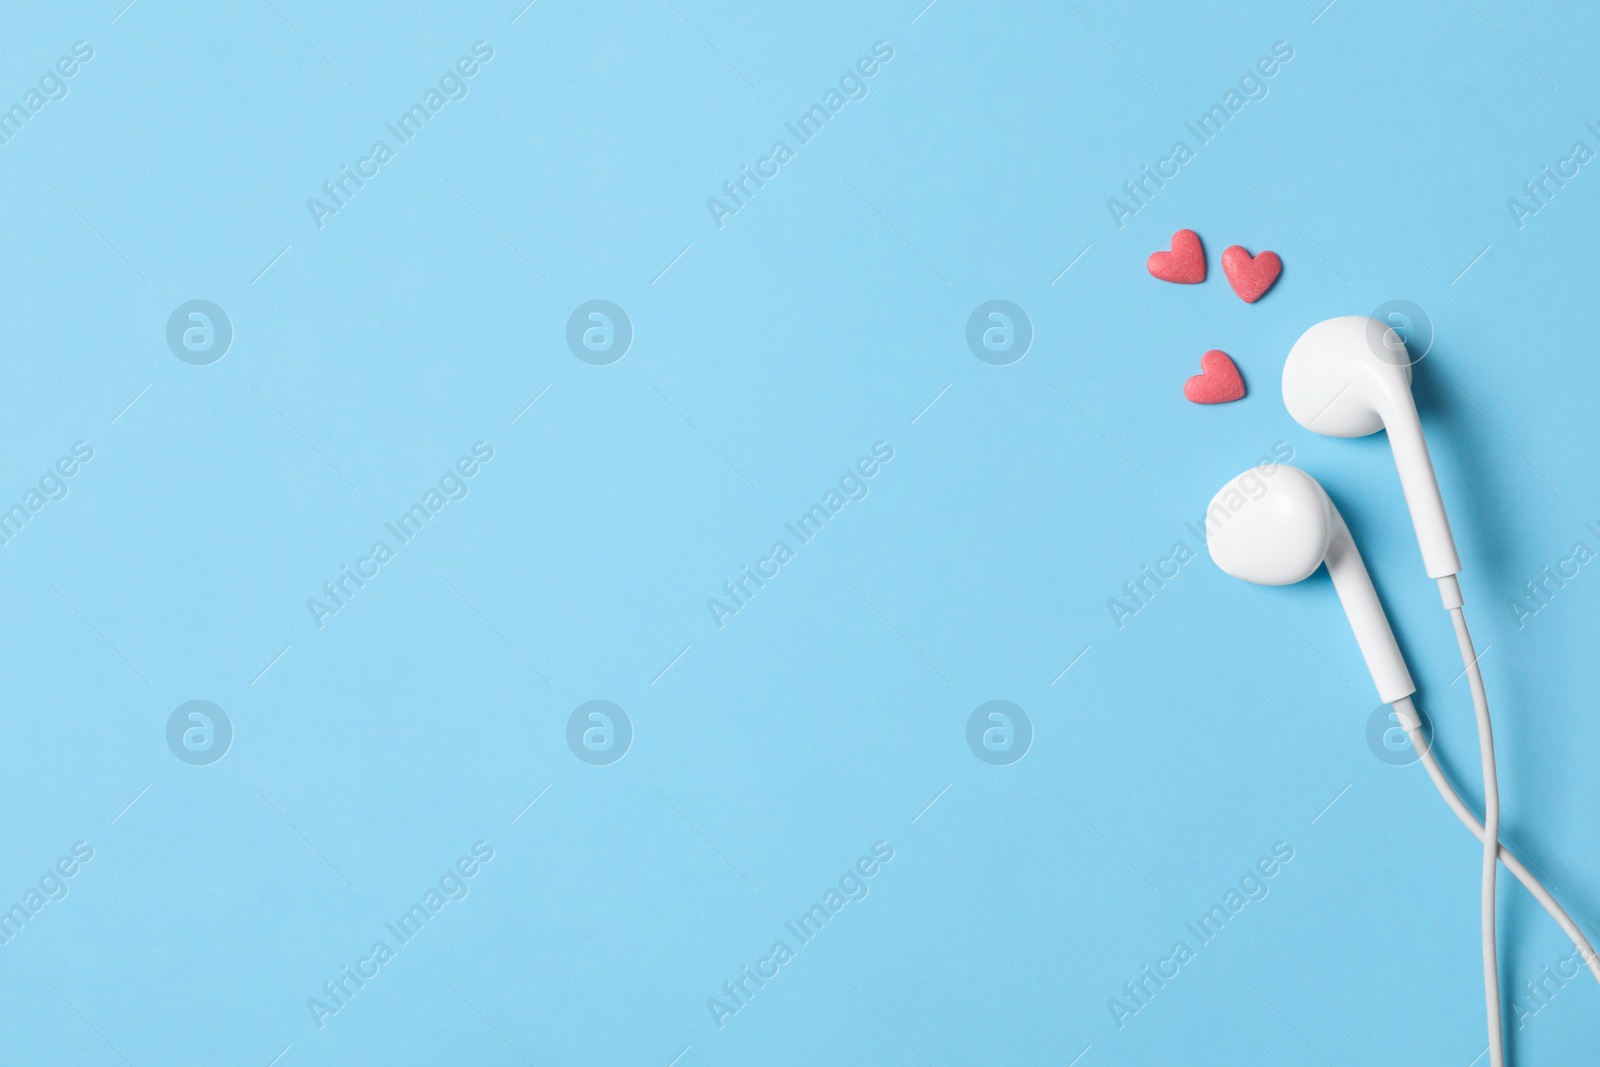 Photo of Modern earphones and pink heart shaped sprinkles on light blue background, flat lay with space for text. Listening love music songs